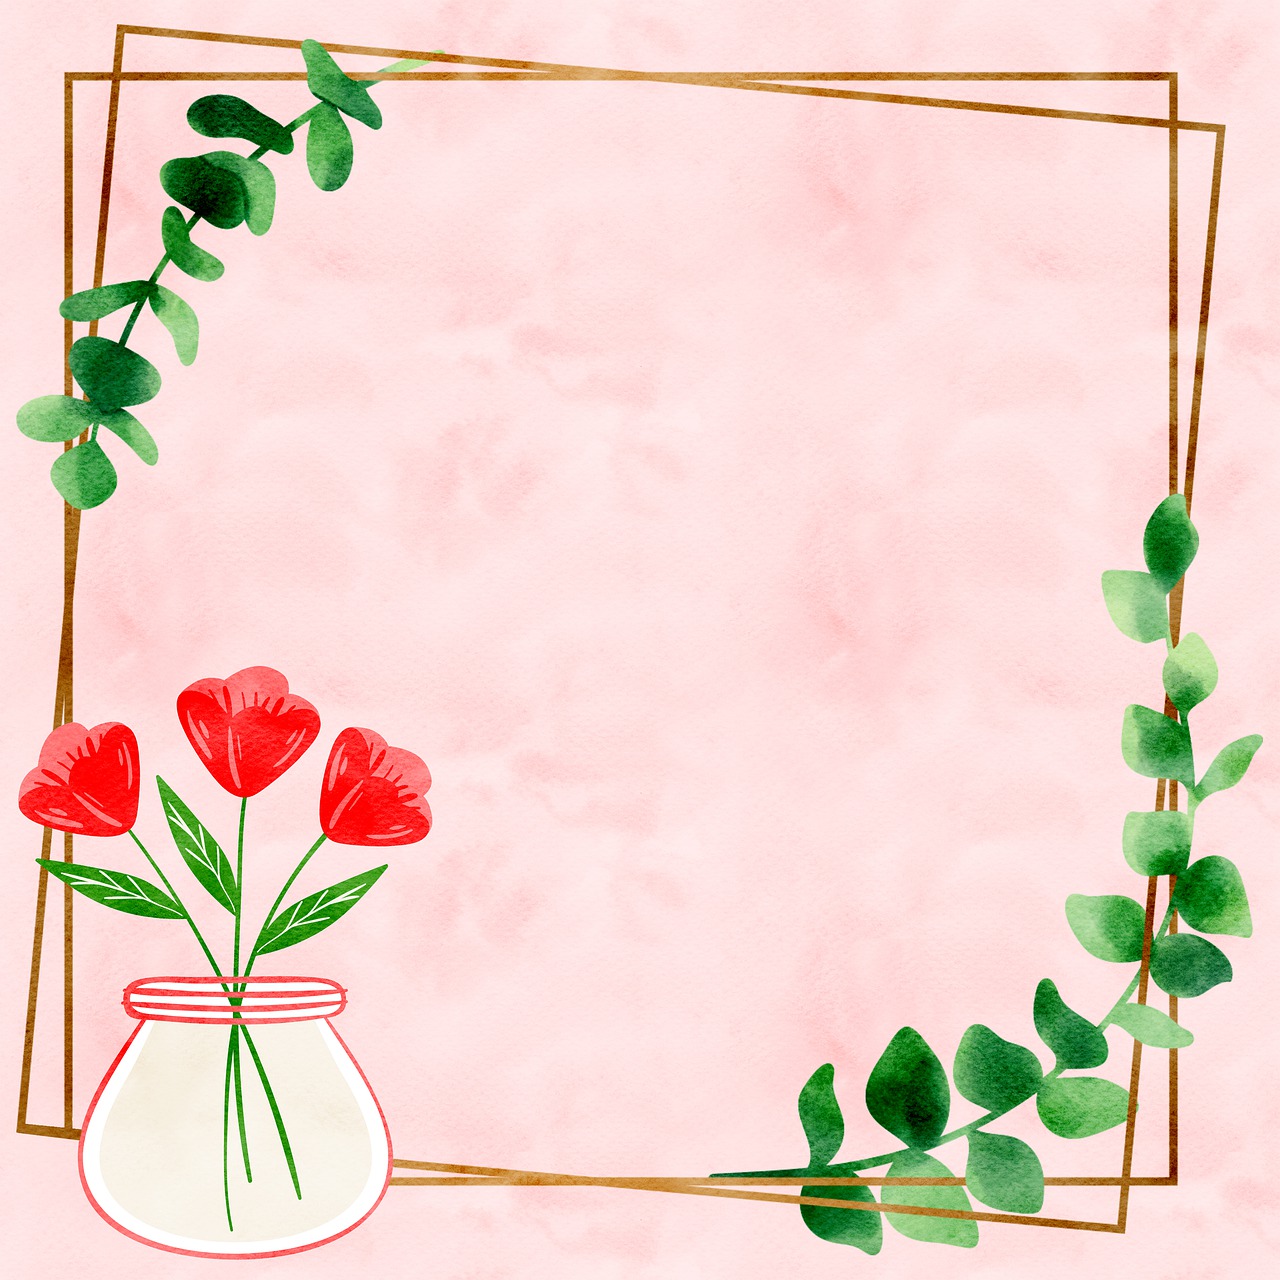 a vase filled with red flowers on top of a pink background, a watercolor painting, inspired by Masamitsu Ōta, decorative frame, resources background, ivy, mall background